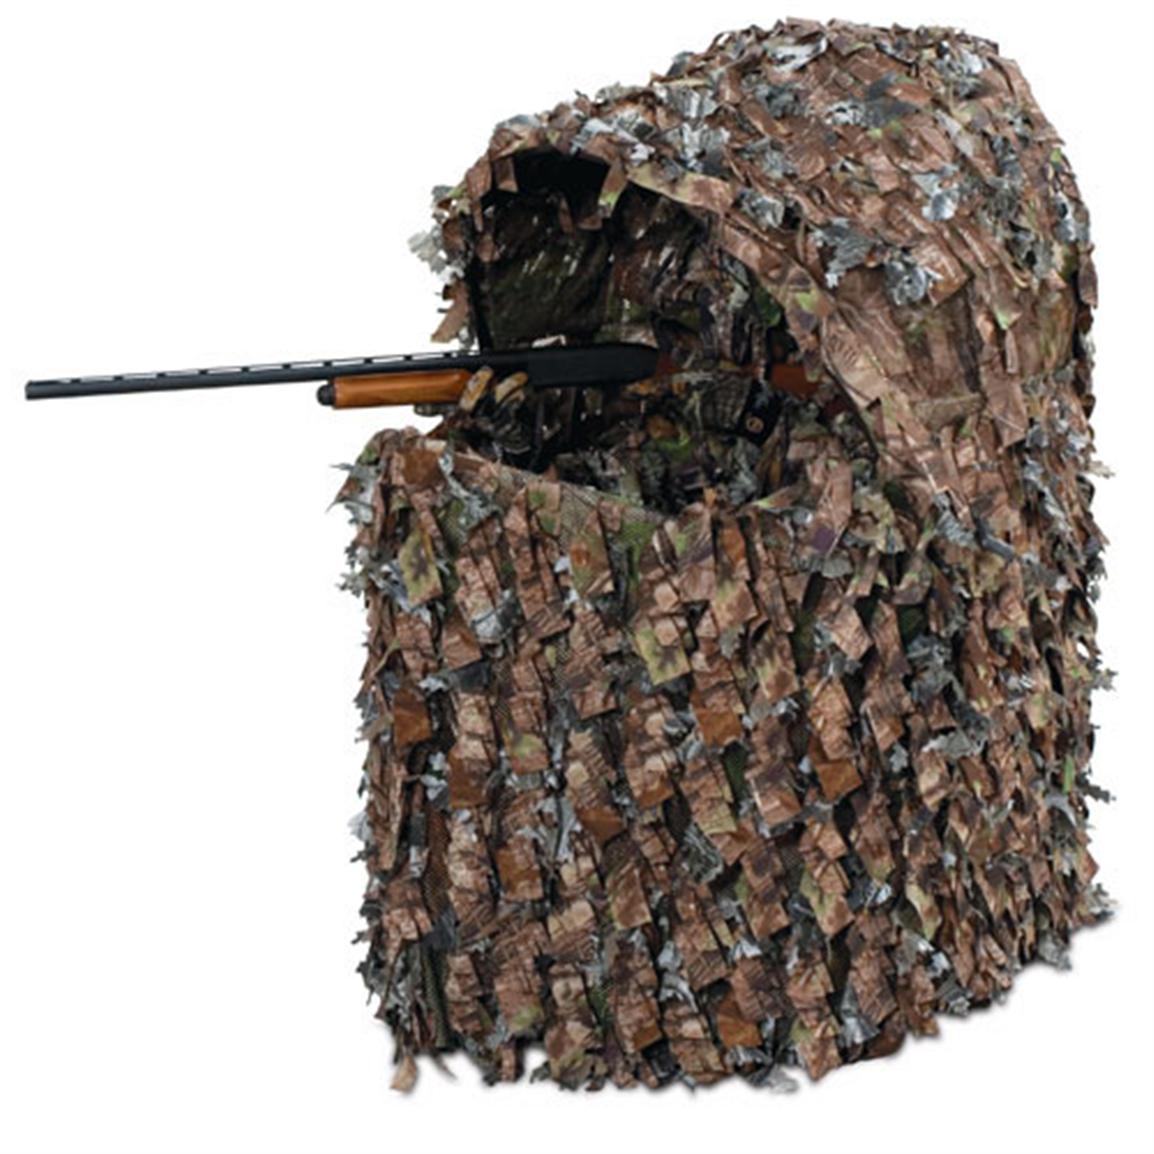 Ameristep One Man Choice Chair Blind 148455 Ground Blinds At Sportsman S Guide